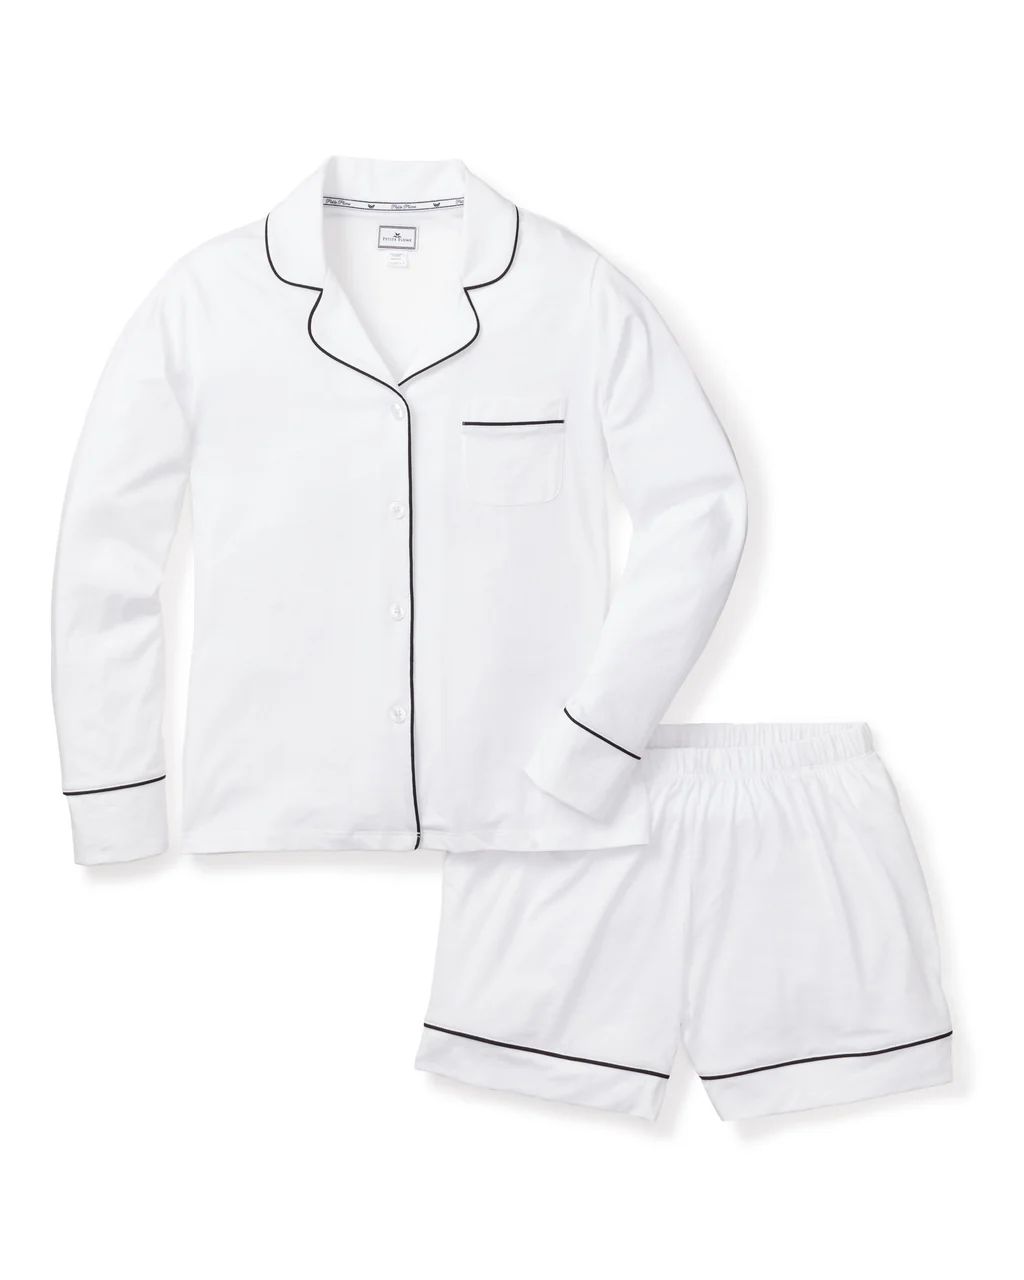 Luxe Pima Cotton White Short Set with Black Piping | Petite Plume